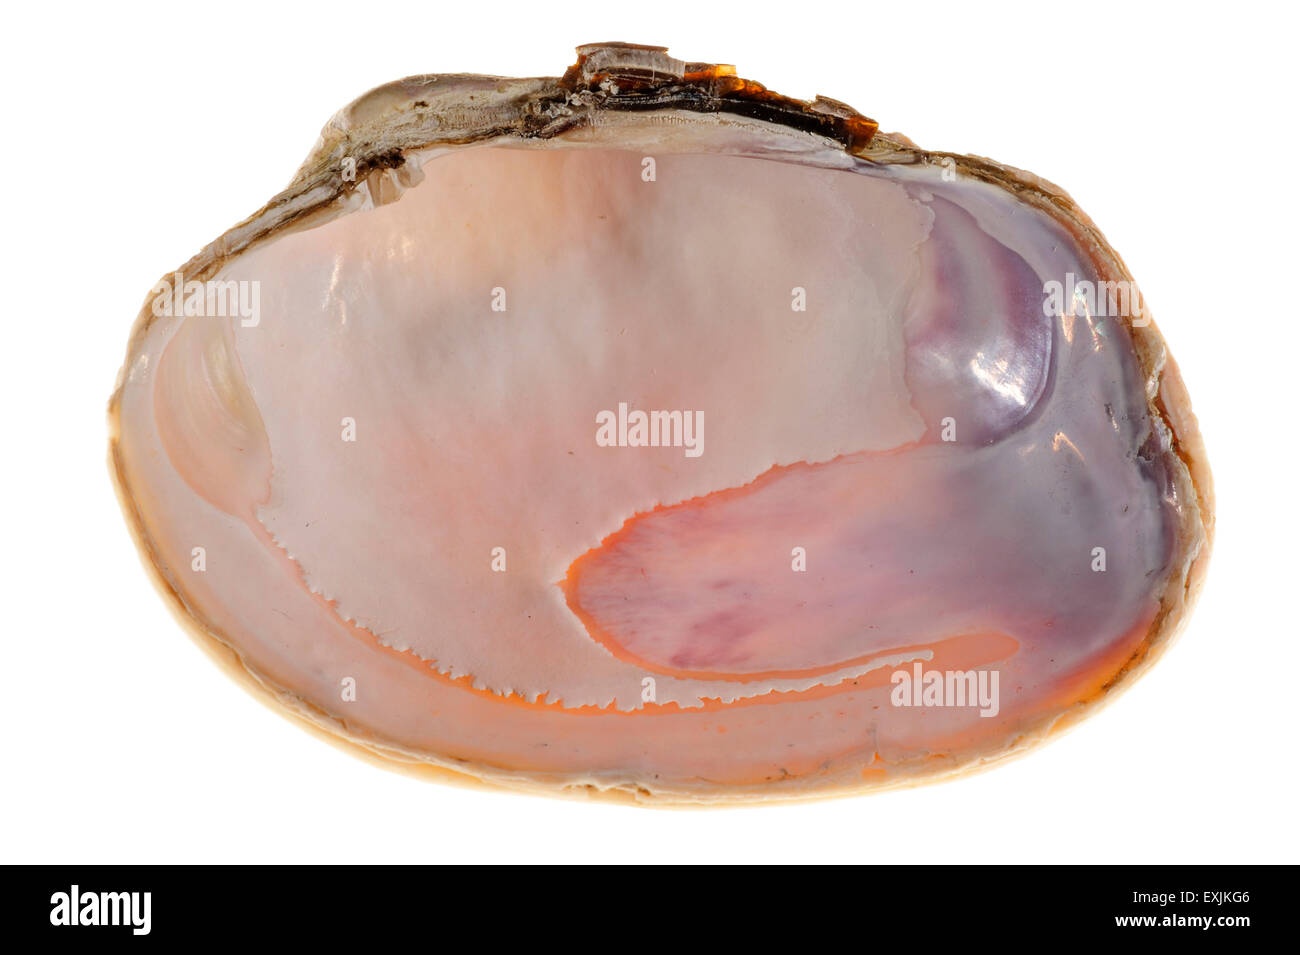 Pullet carpet shell (Venerupis senegalensis) showing anterior and posterior adductor muscle scars, pallial line, pallial sinus Stock Photo